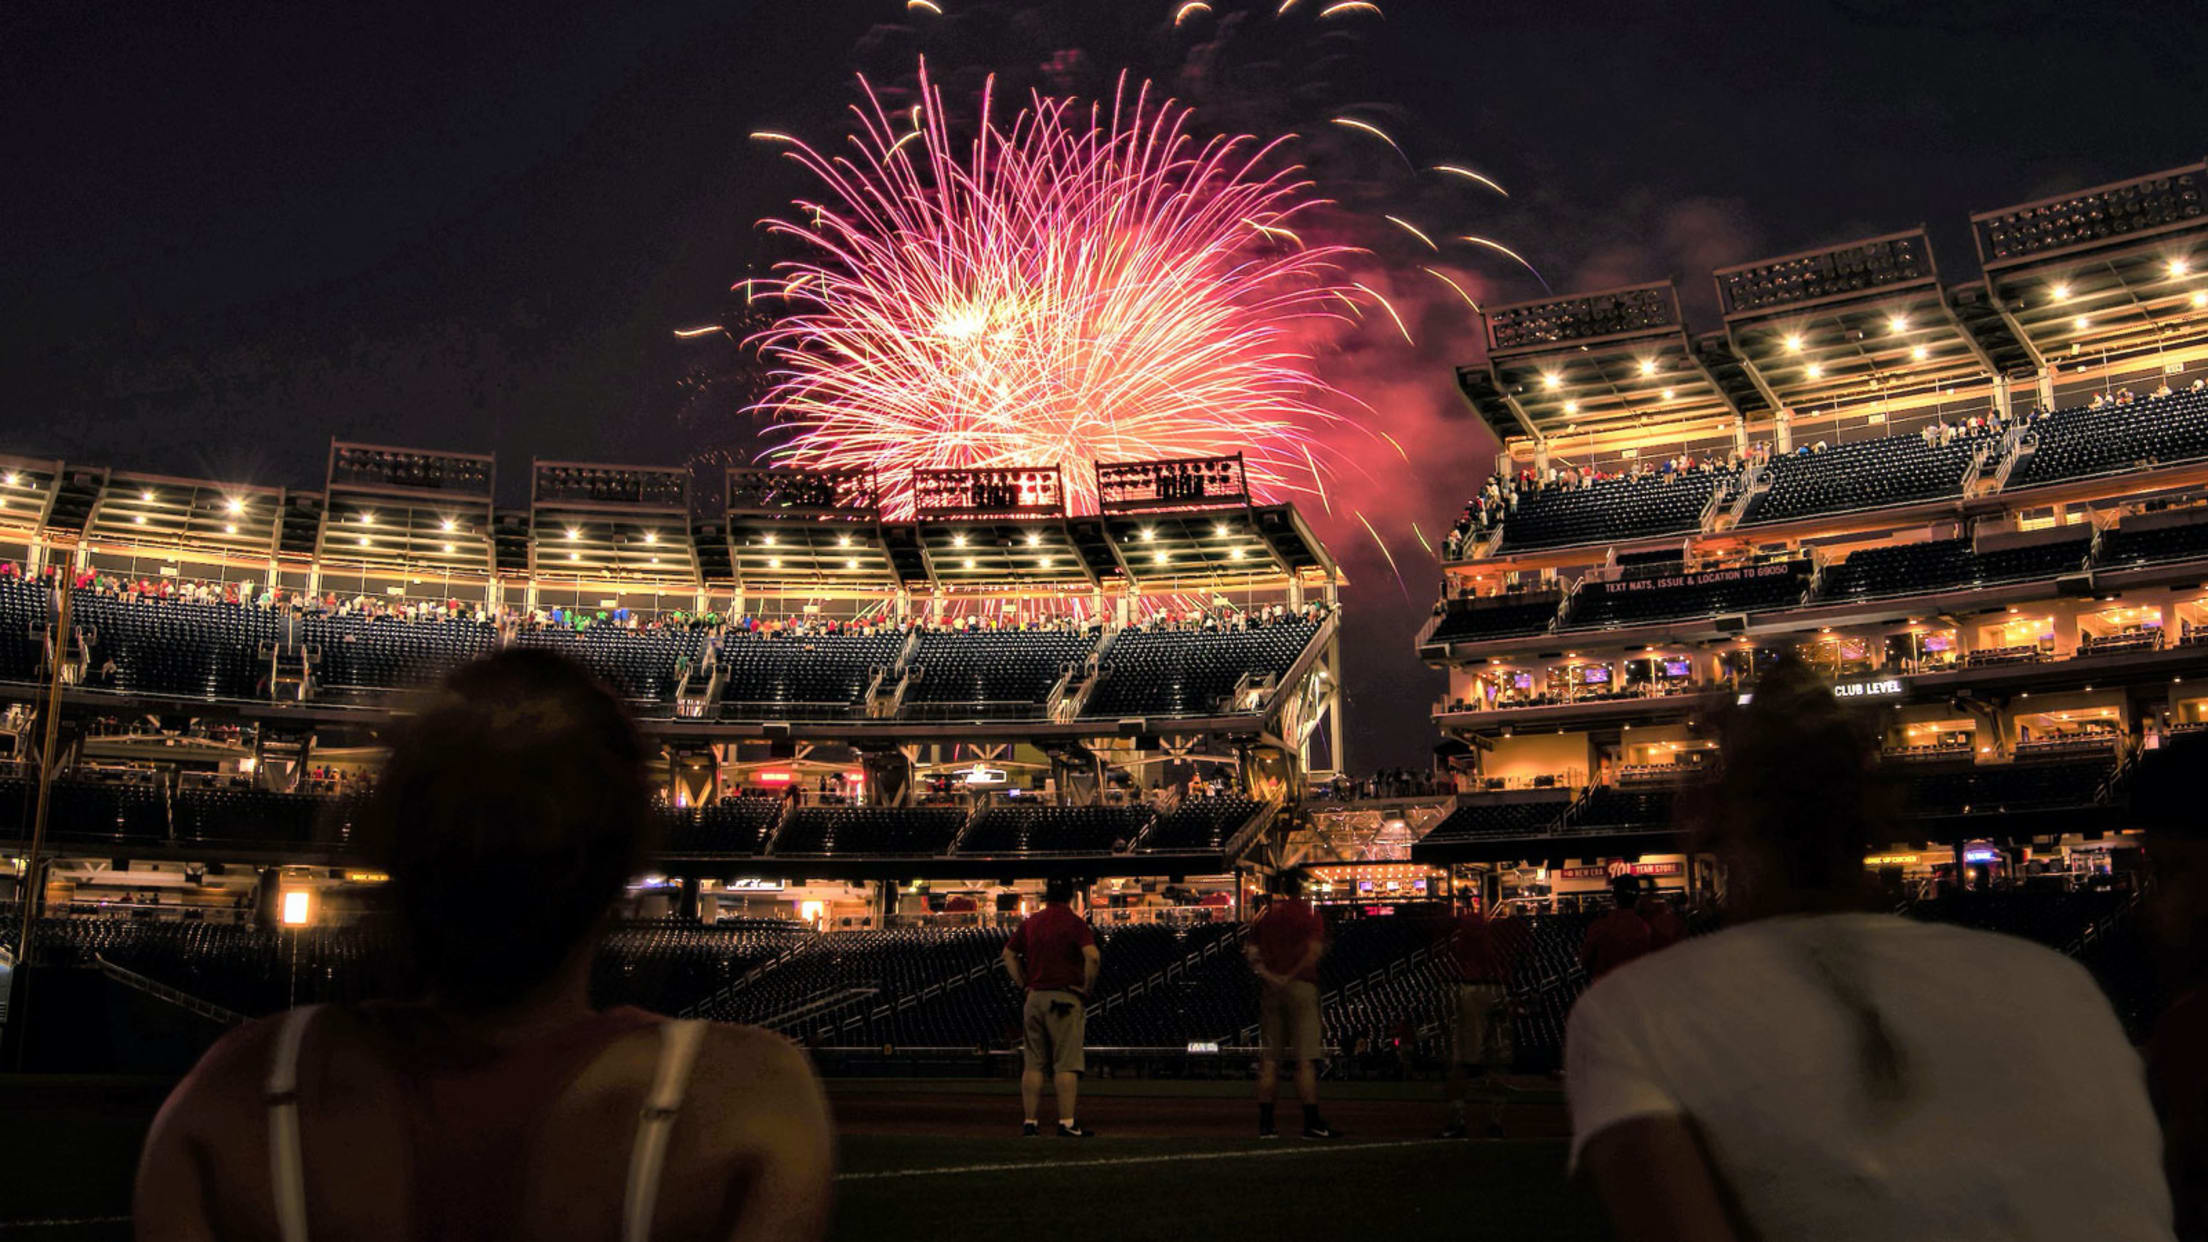 PHOTOS: Game of Thrones Night at Nationals Park, by Nationals  Communications